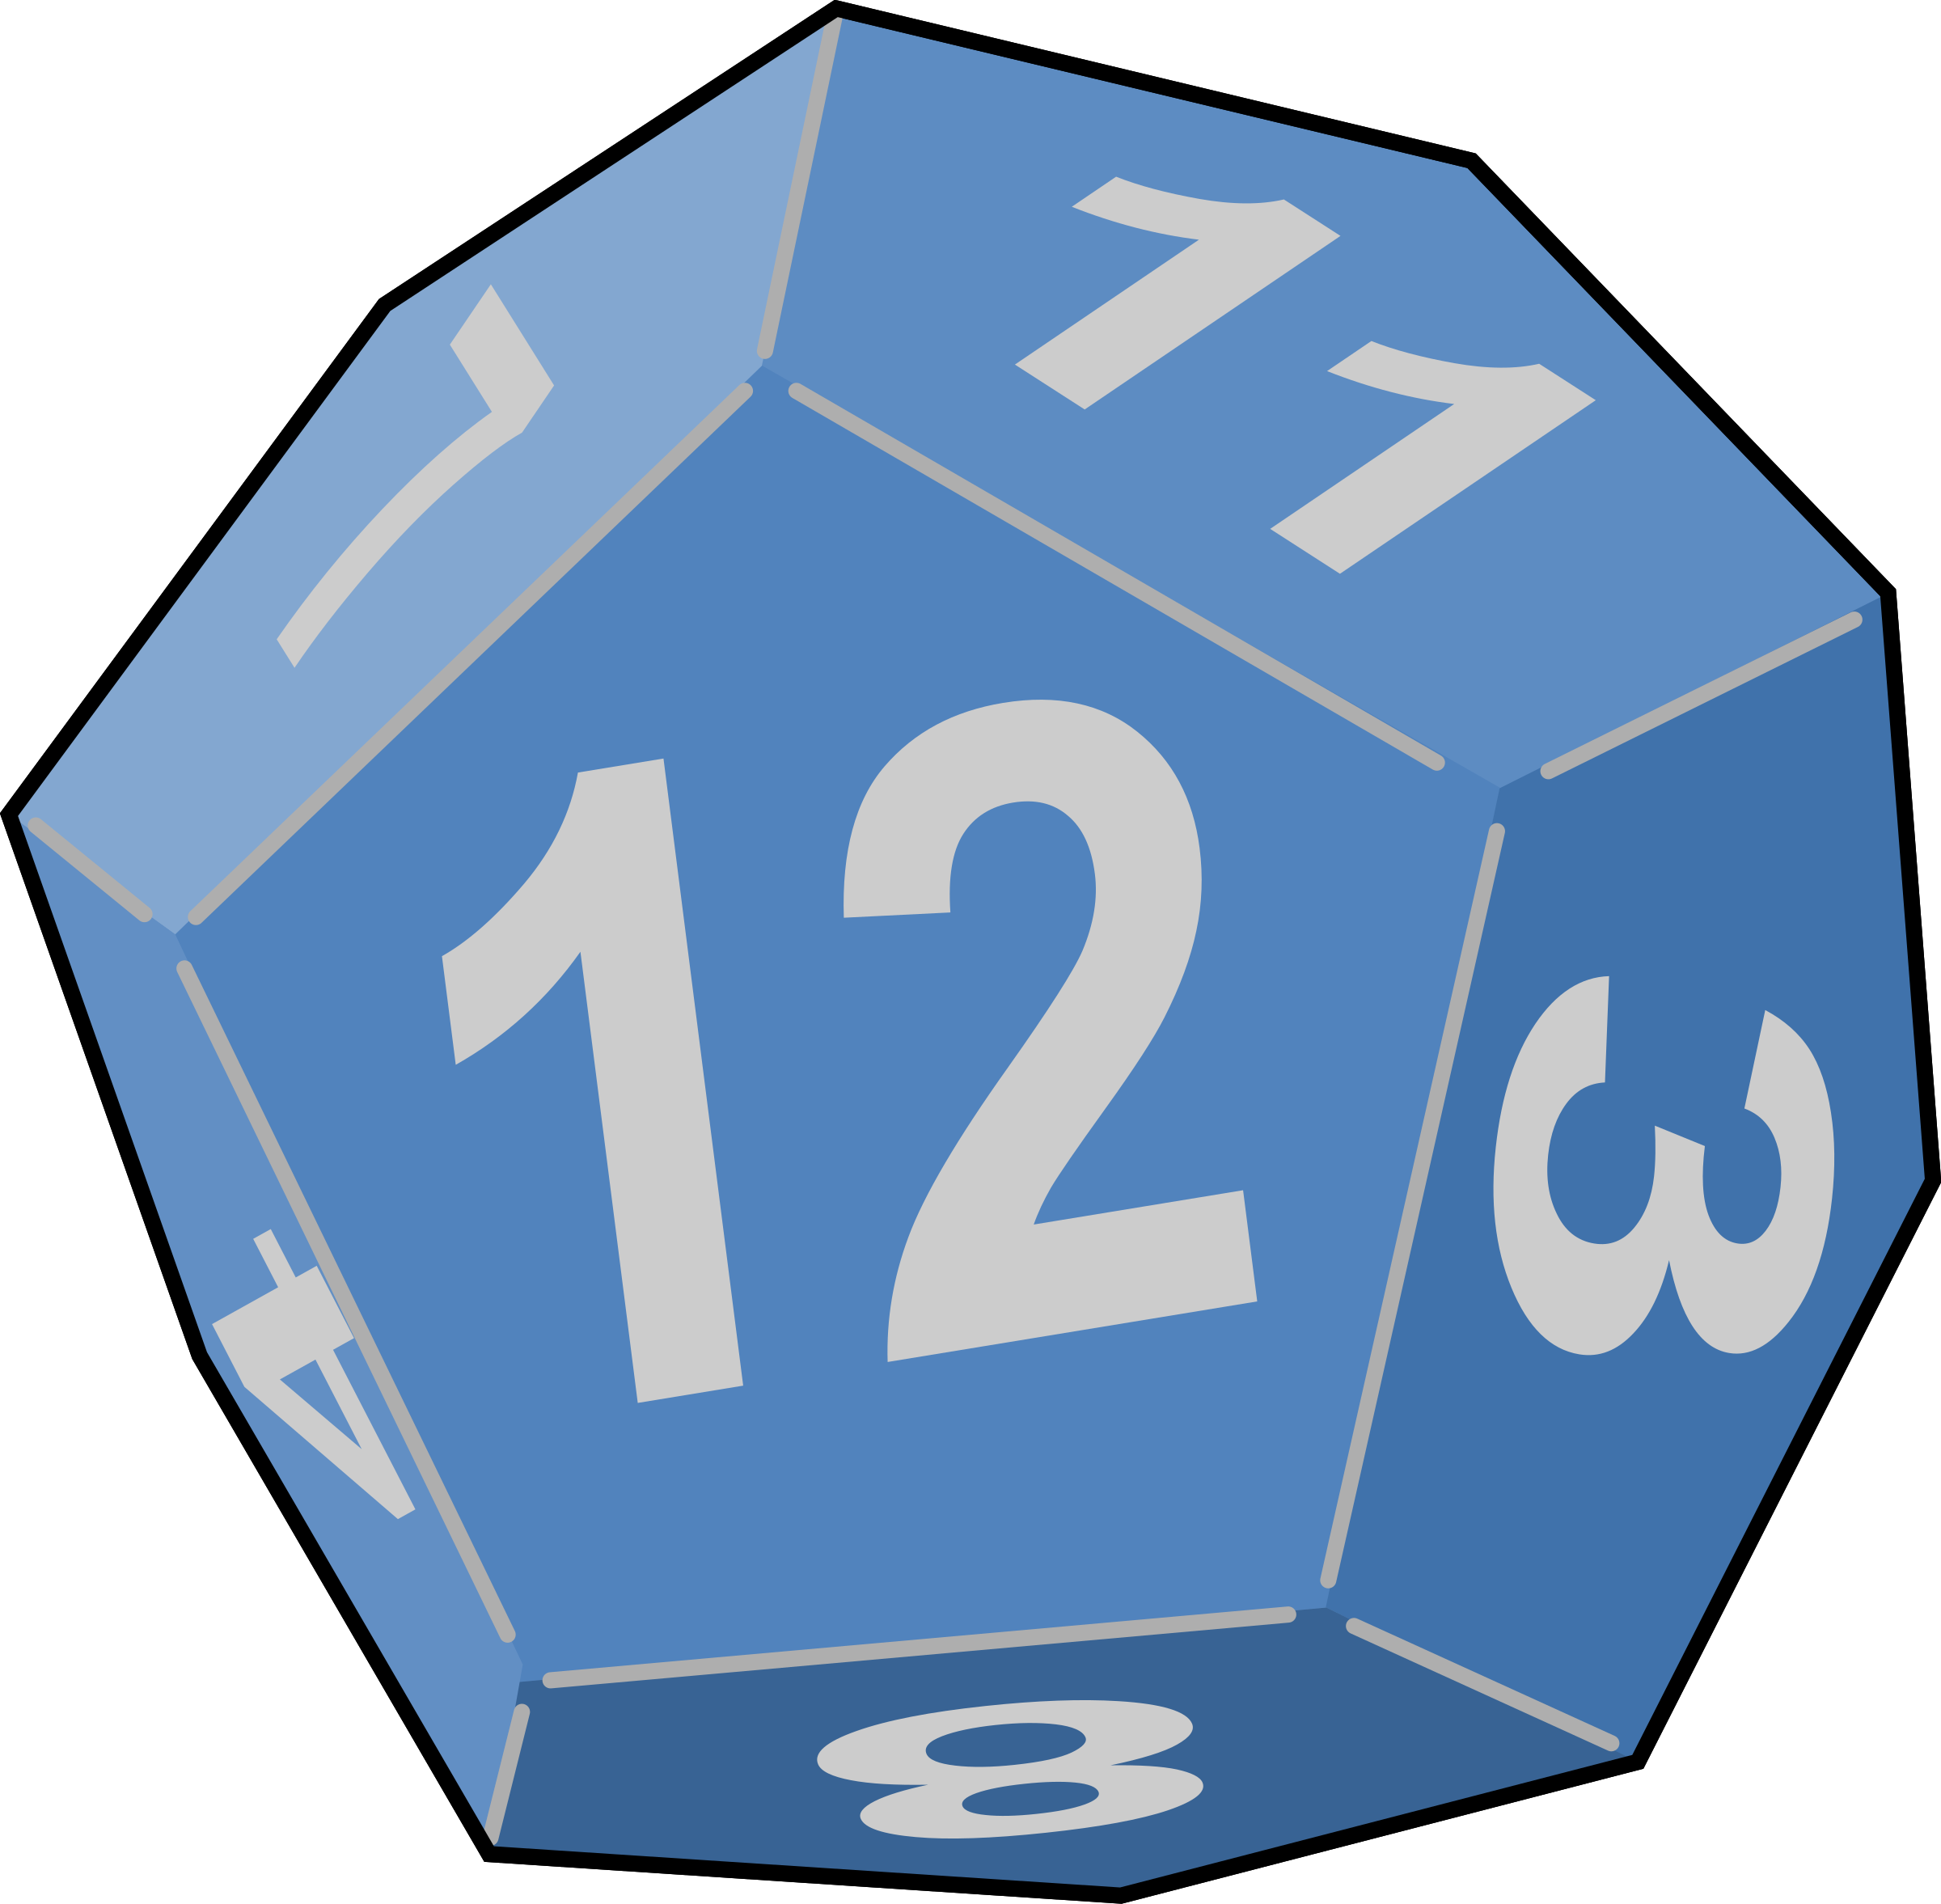 dice clipart sided